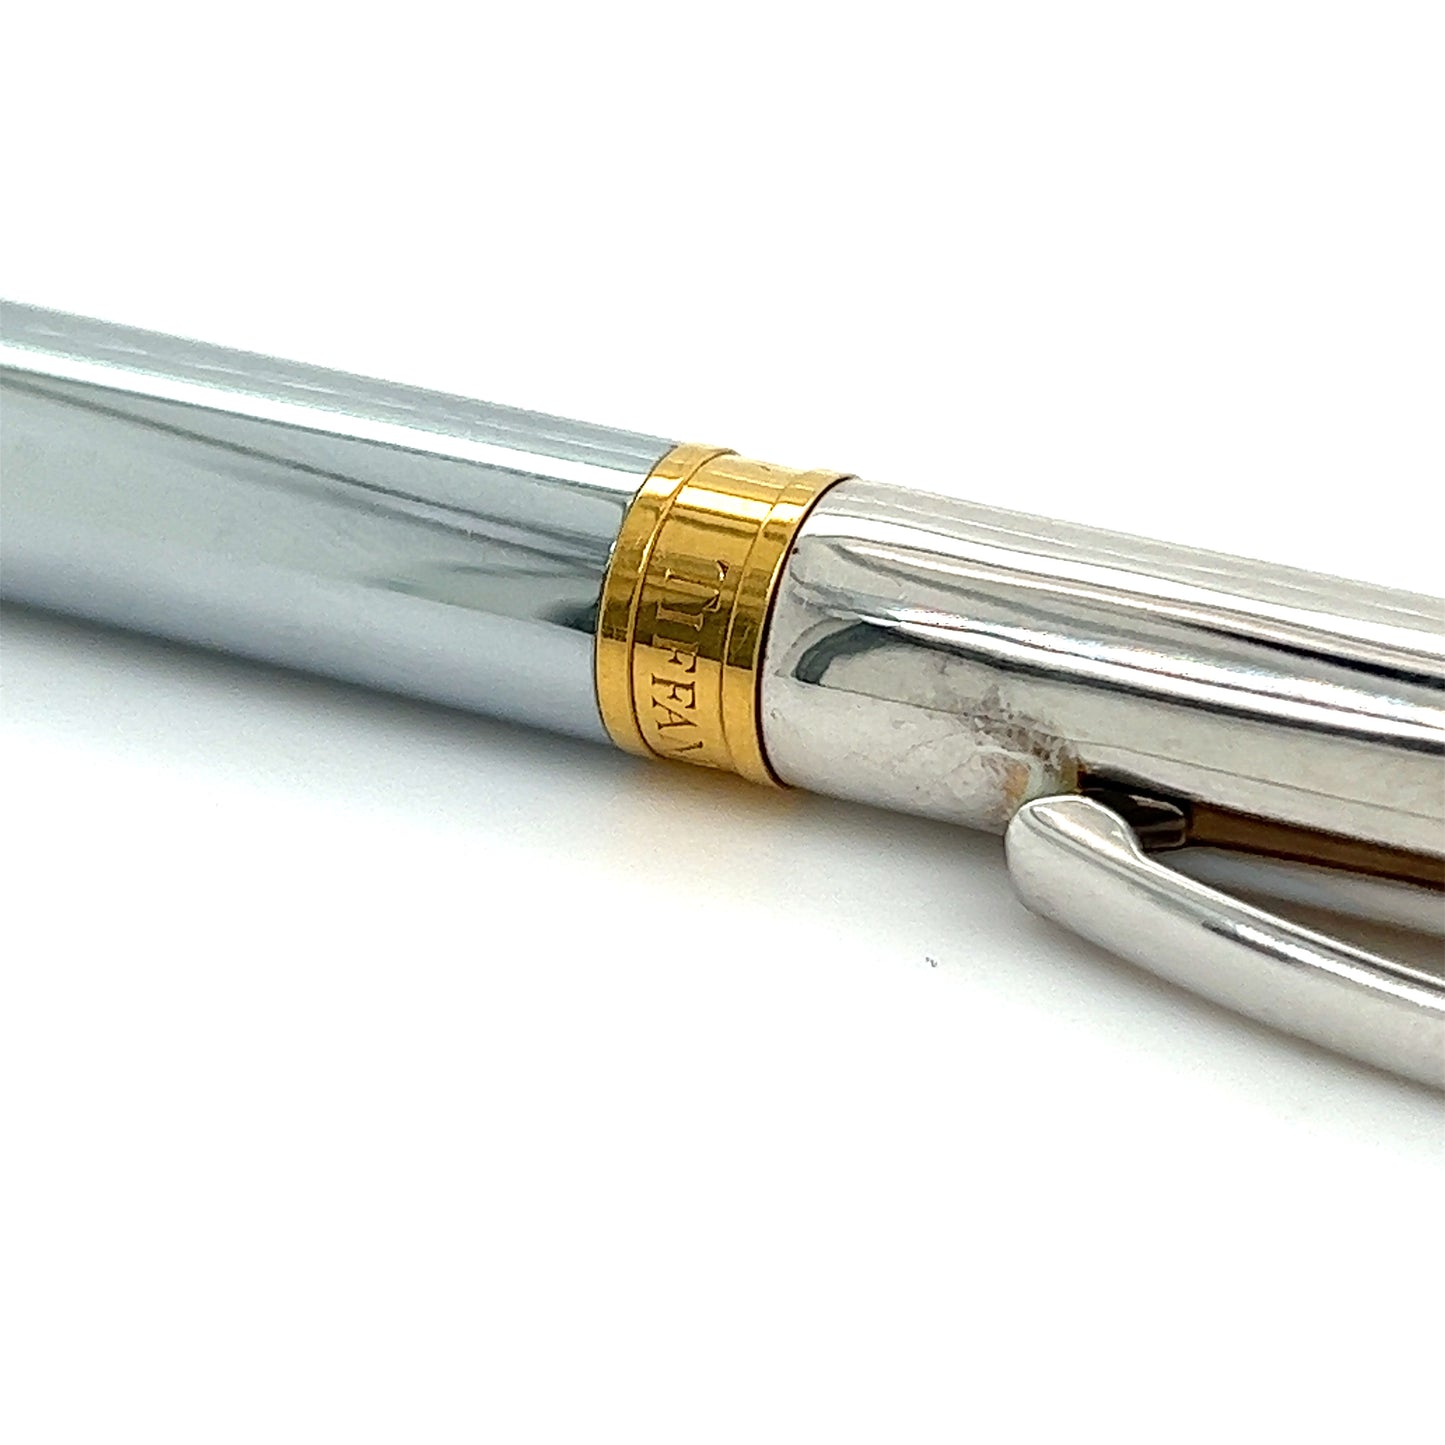 Tiffany & Co Gold Plated Ballpoint Pen 5.25" Sterling Silver TIF272